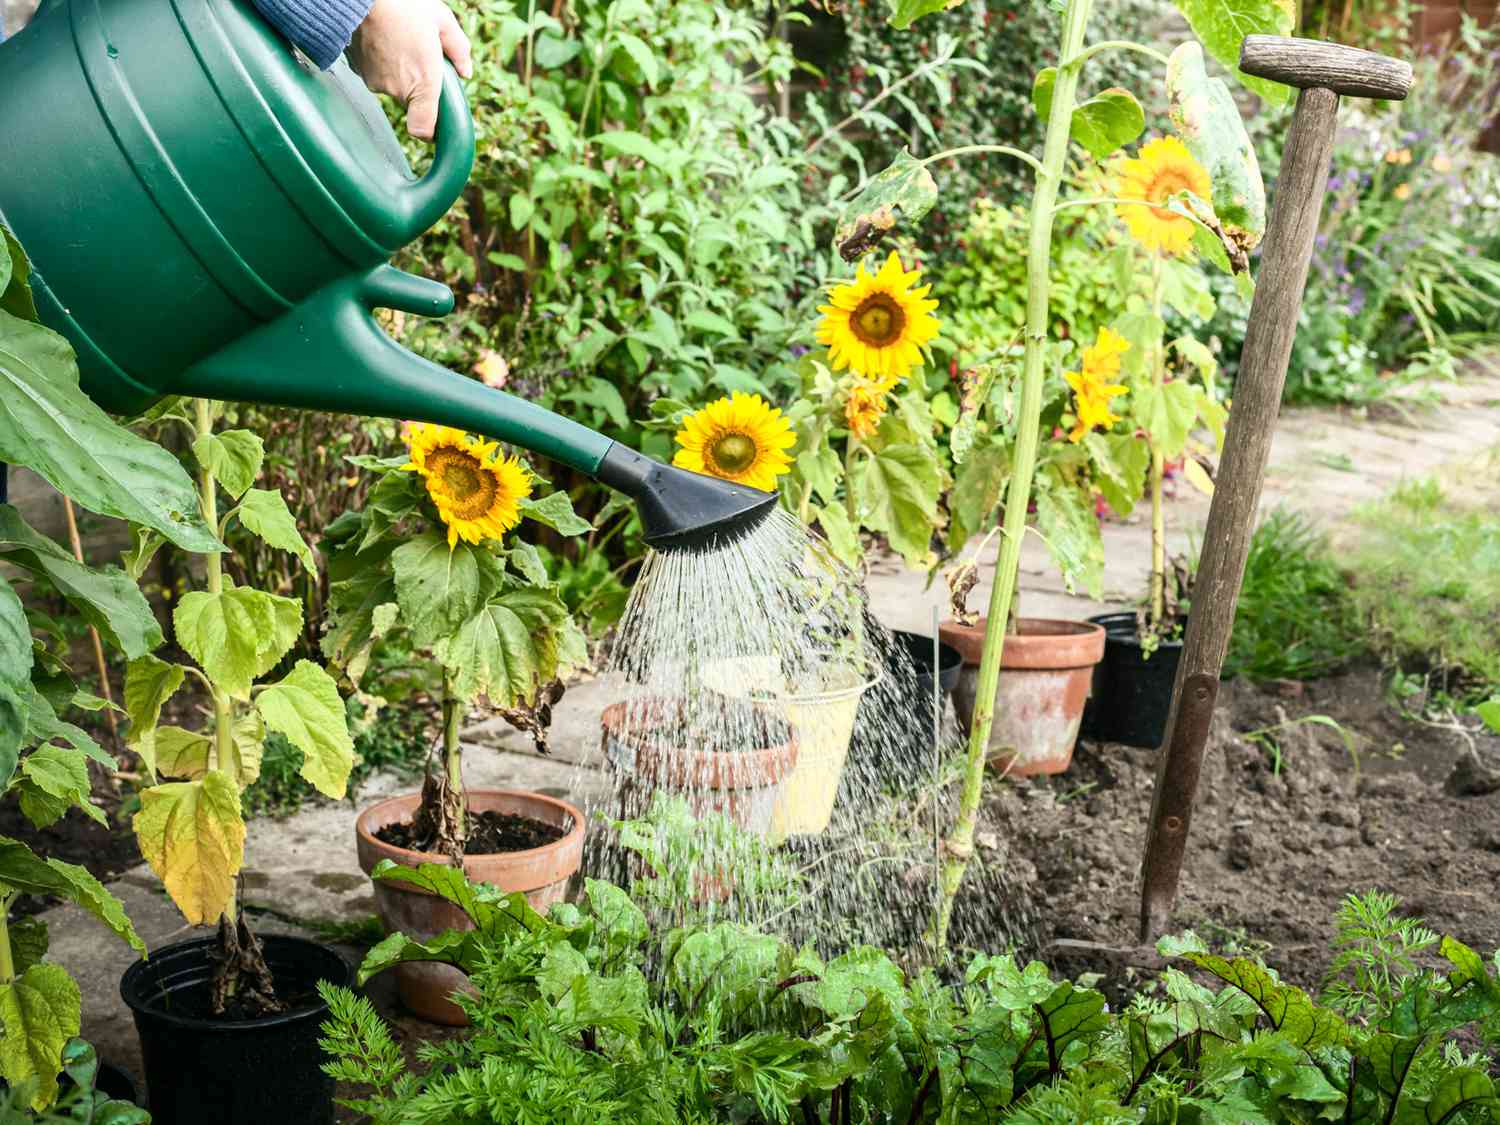 watering sunflowers in garden with green watering can